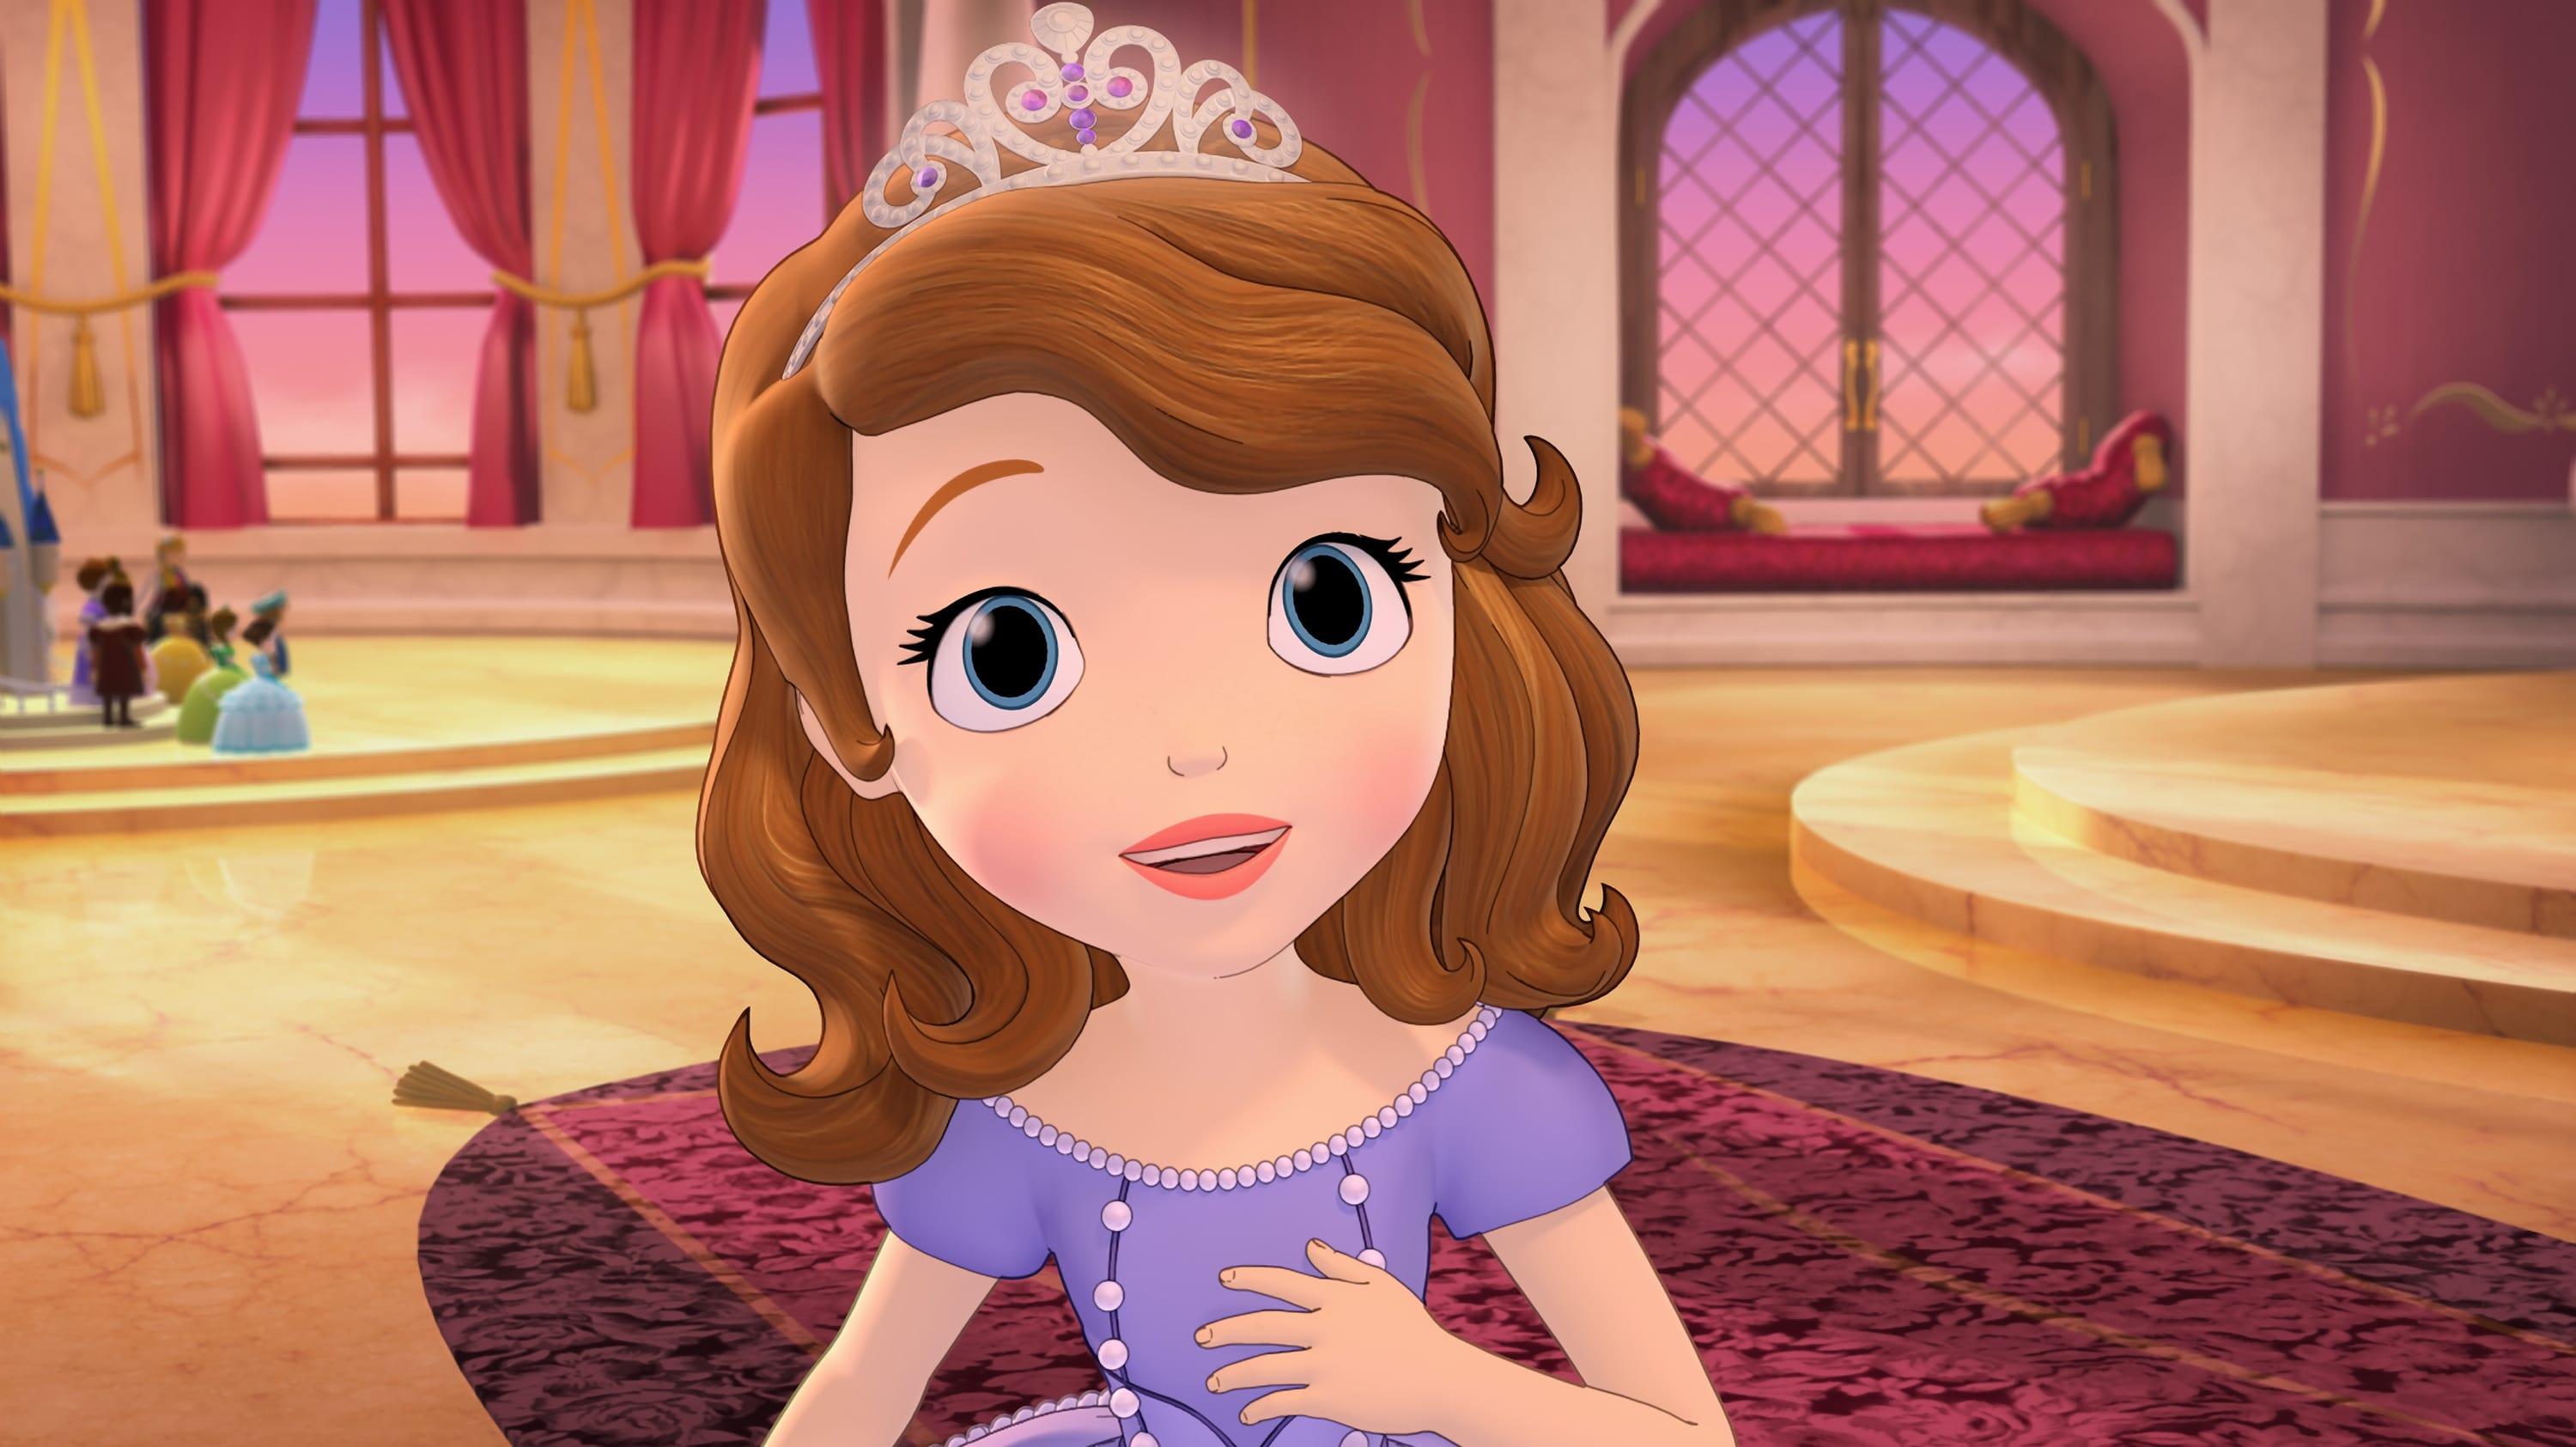 Sofia the First: Once Upon a Princess backdrop